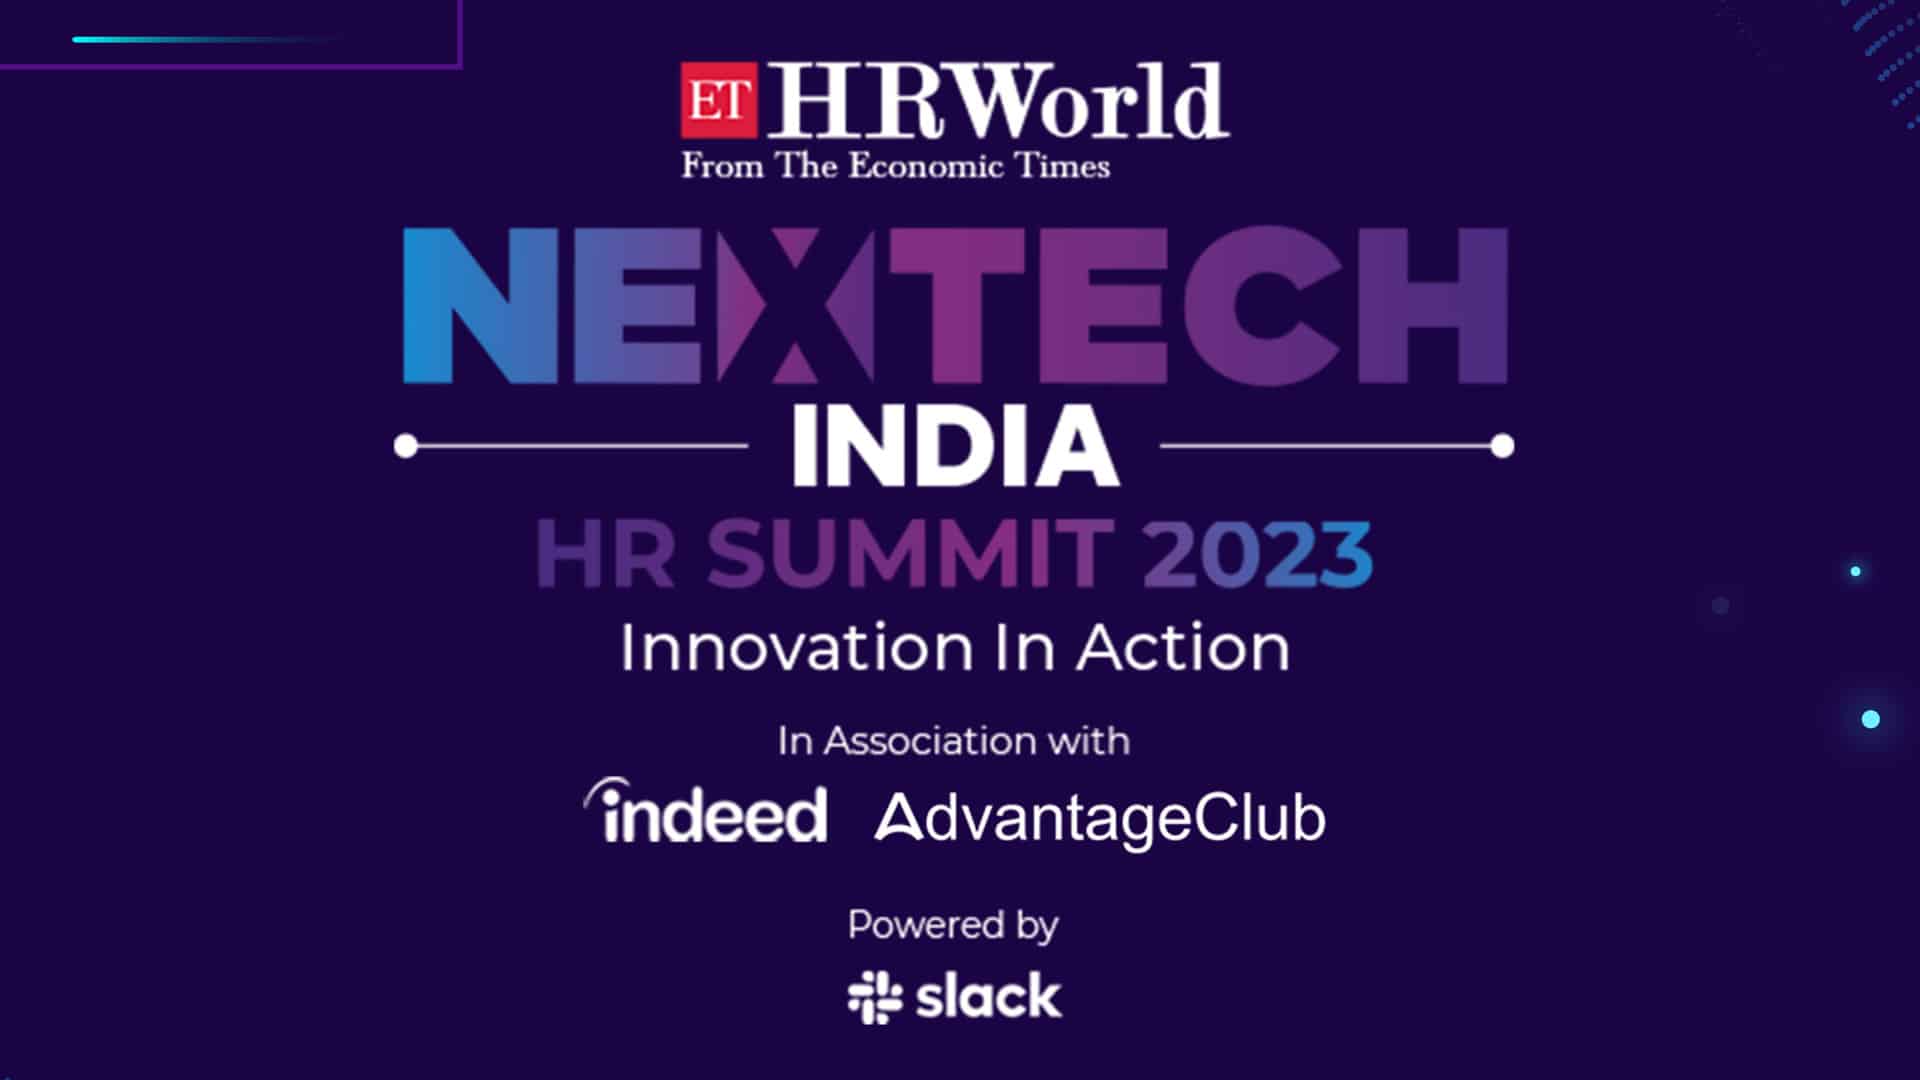 Experience Workplace Innovation in Action at the Nextech India HR Summit 2023